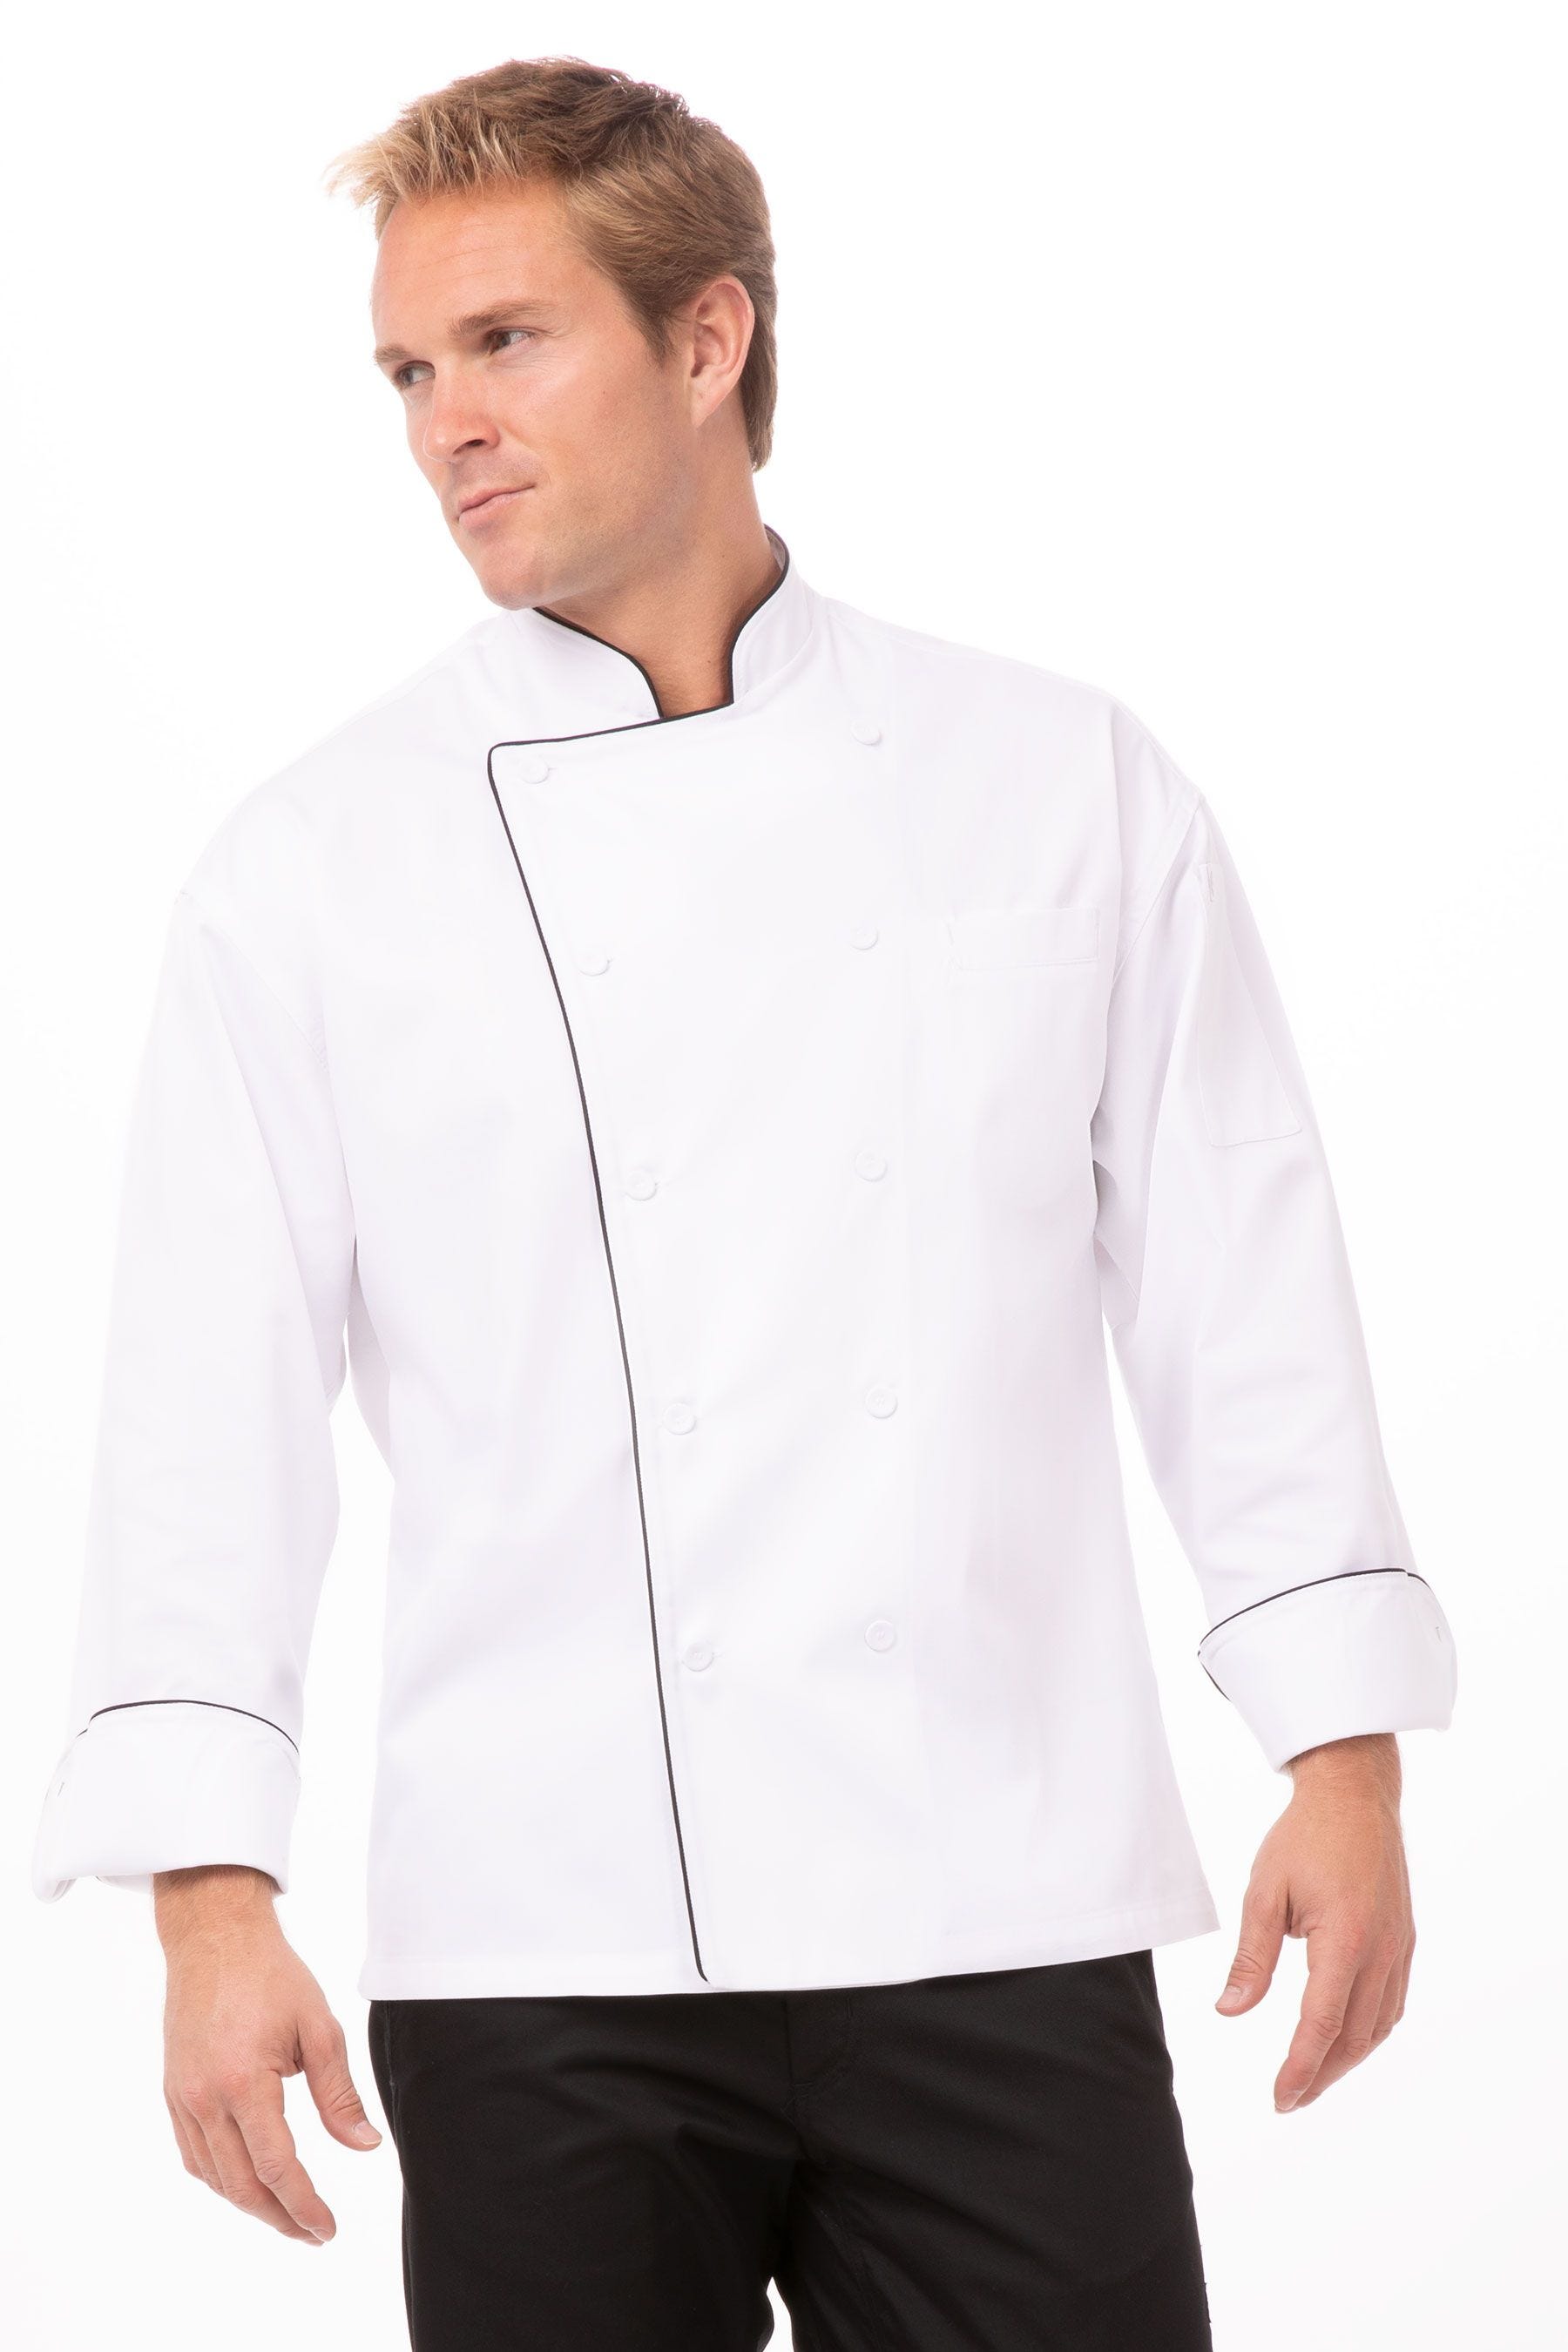 White Long Sleeve Standard Chef Jacket w/Button Fastening Unisex,Chef Clothing 